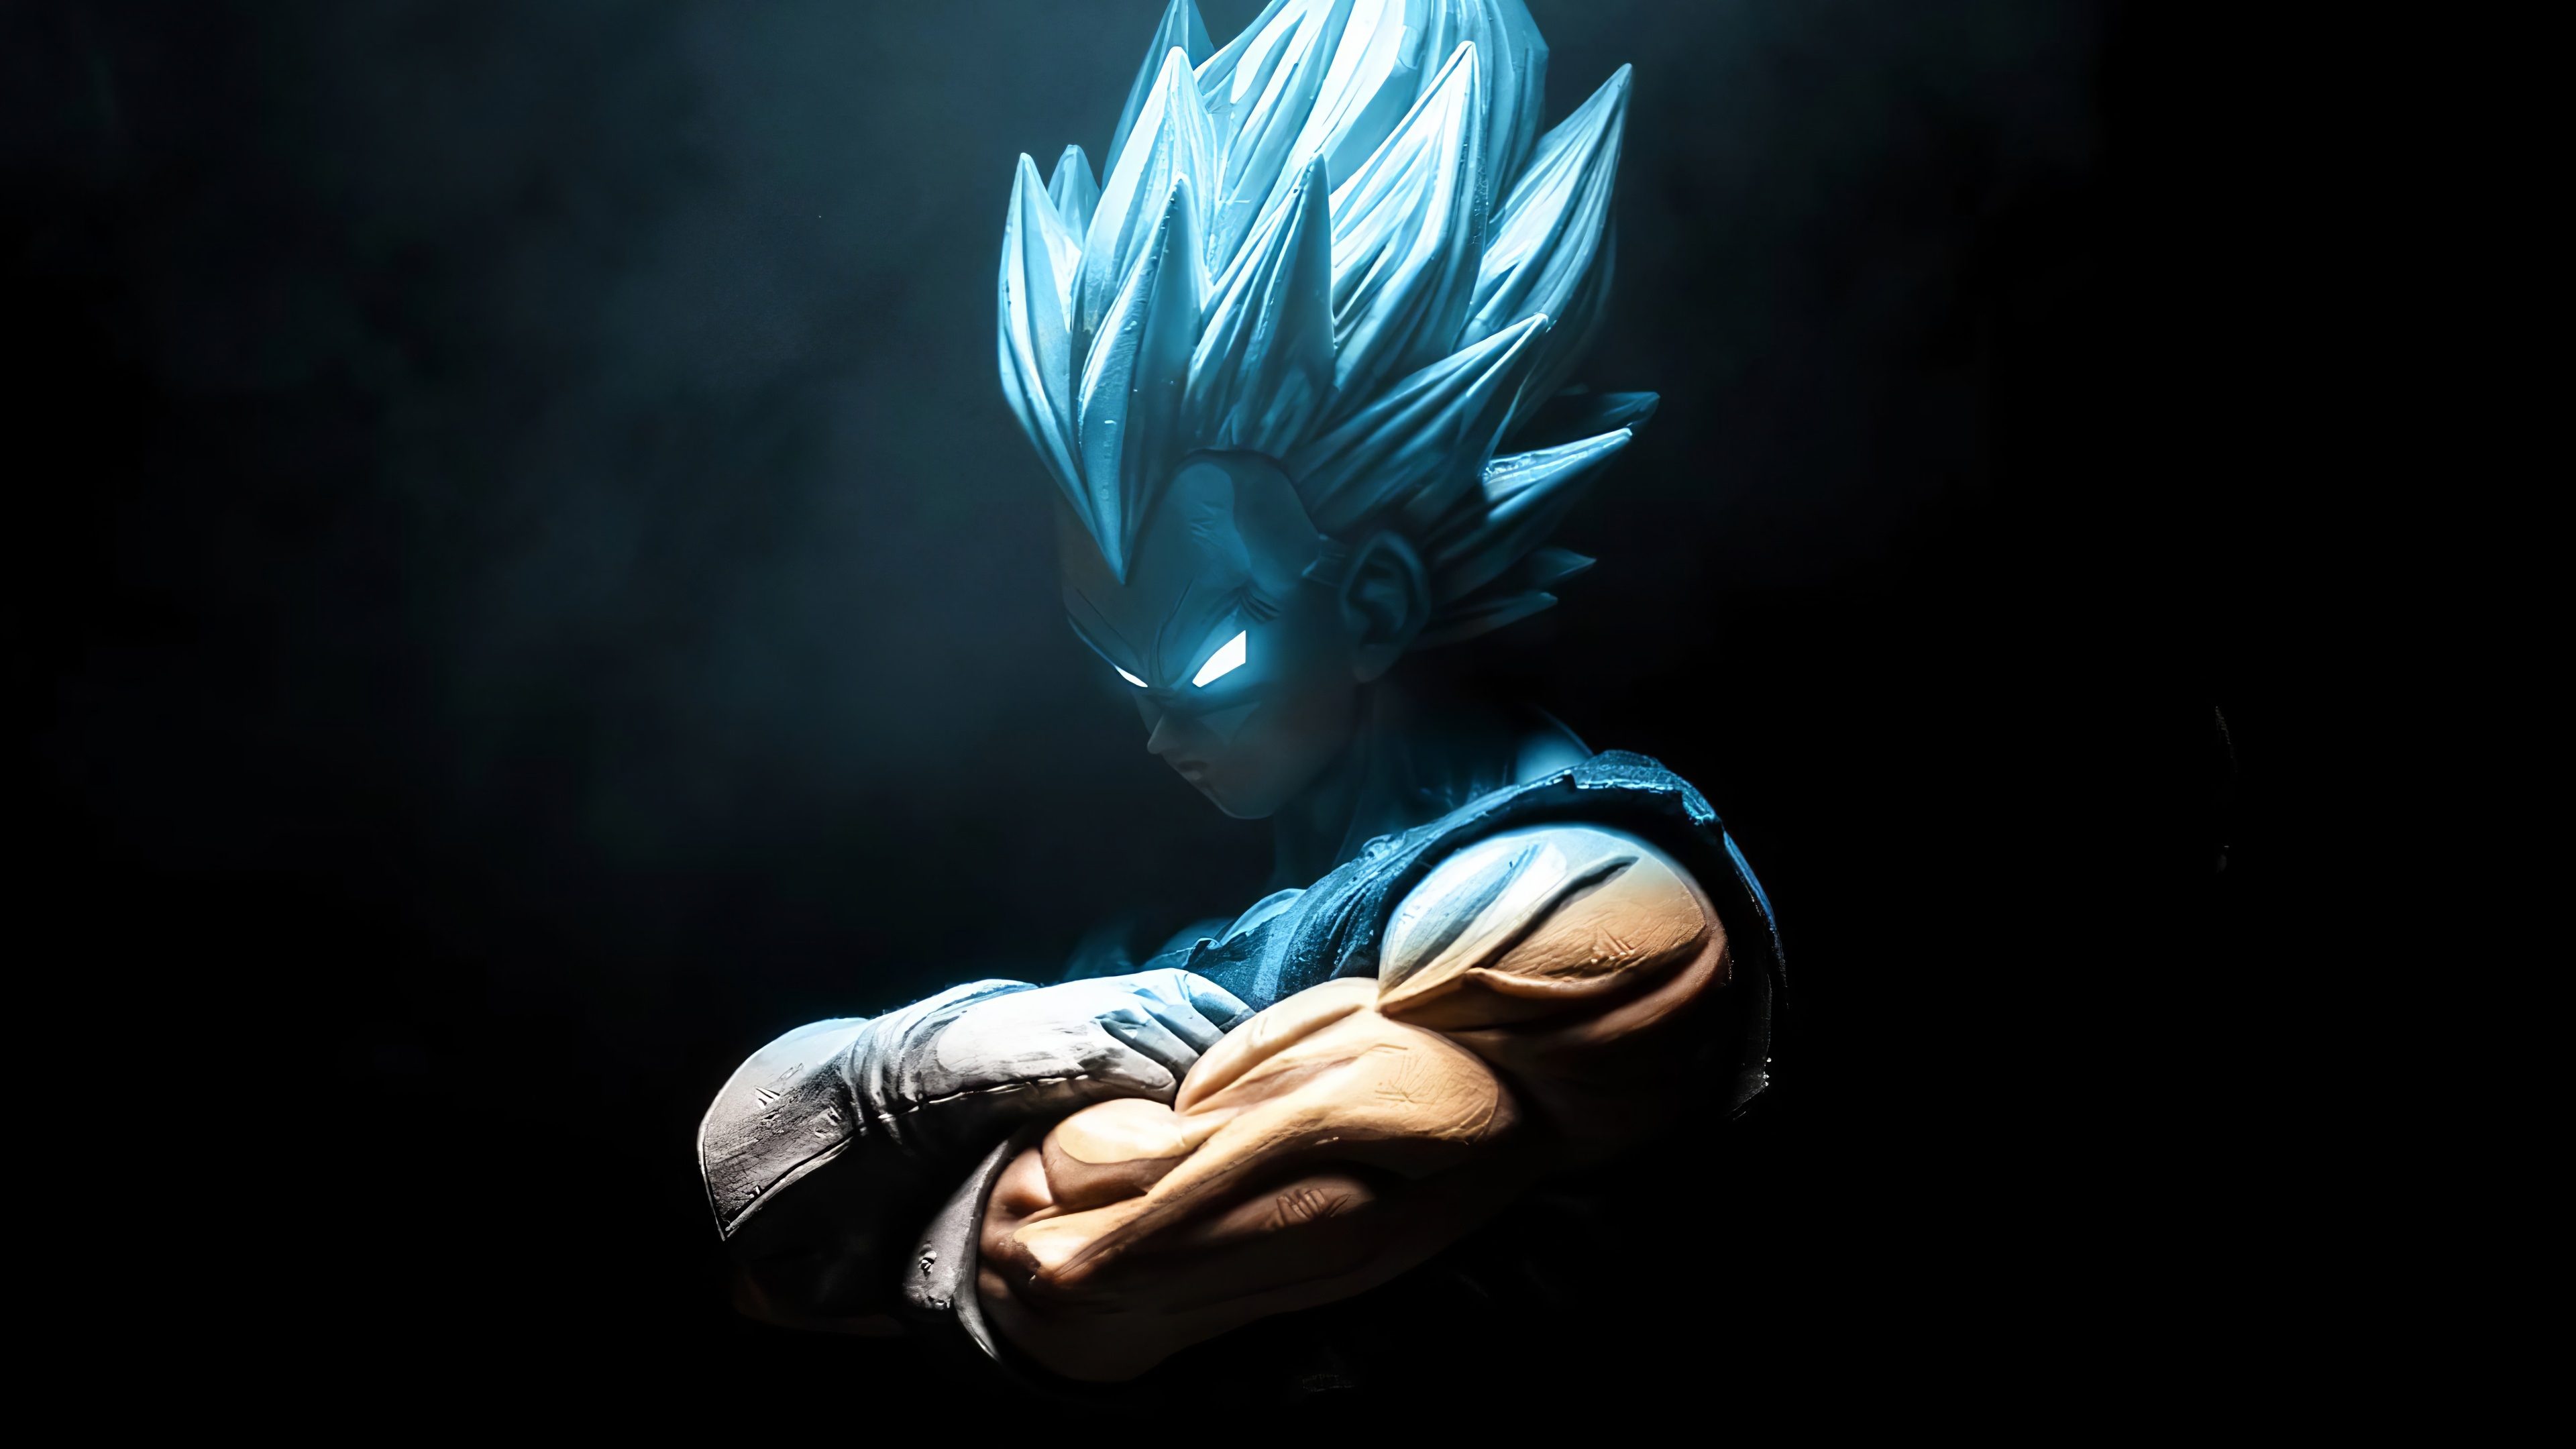 Cool Anime DBZ Wallpapers - Wallpaper Cave